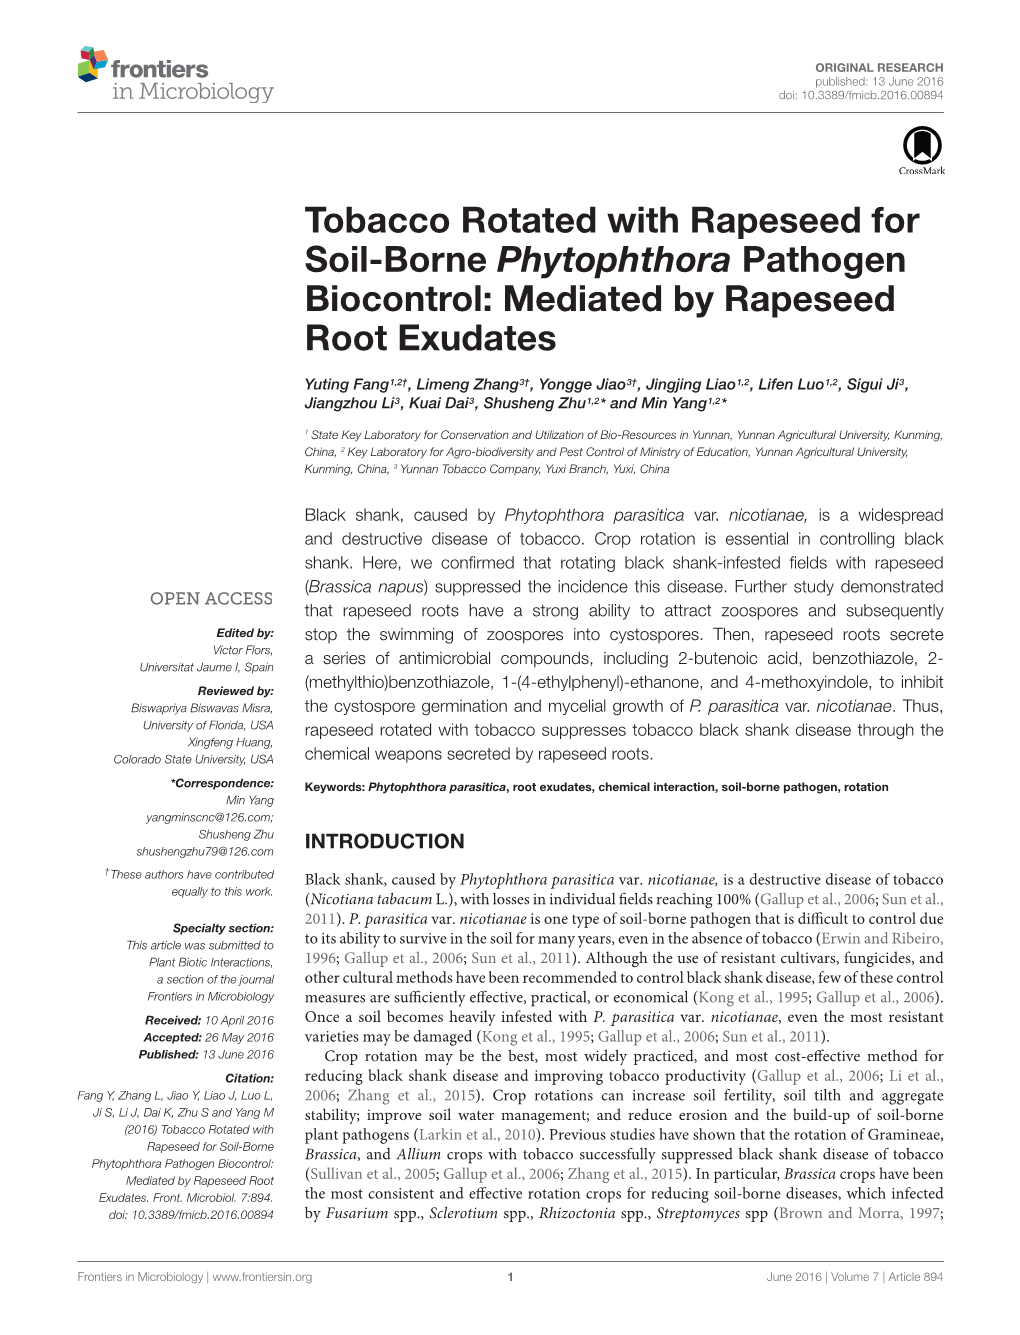 Tobacco Rotated with Rapeseed for Soil-Borne Phytophthora Pathogen Biocontrol: Mediated by Rapeseed Root Exudates